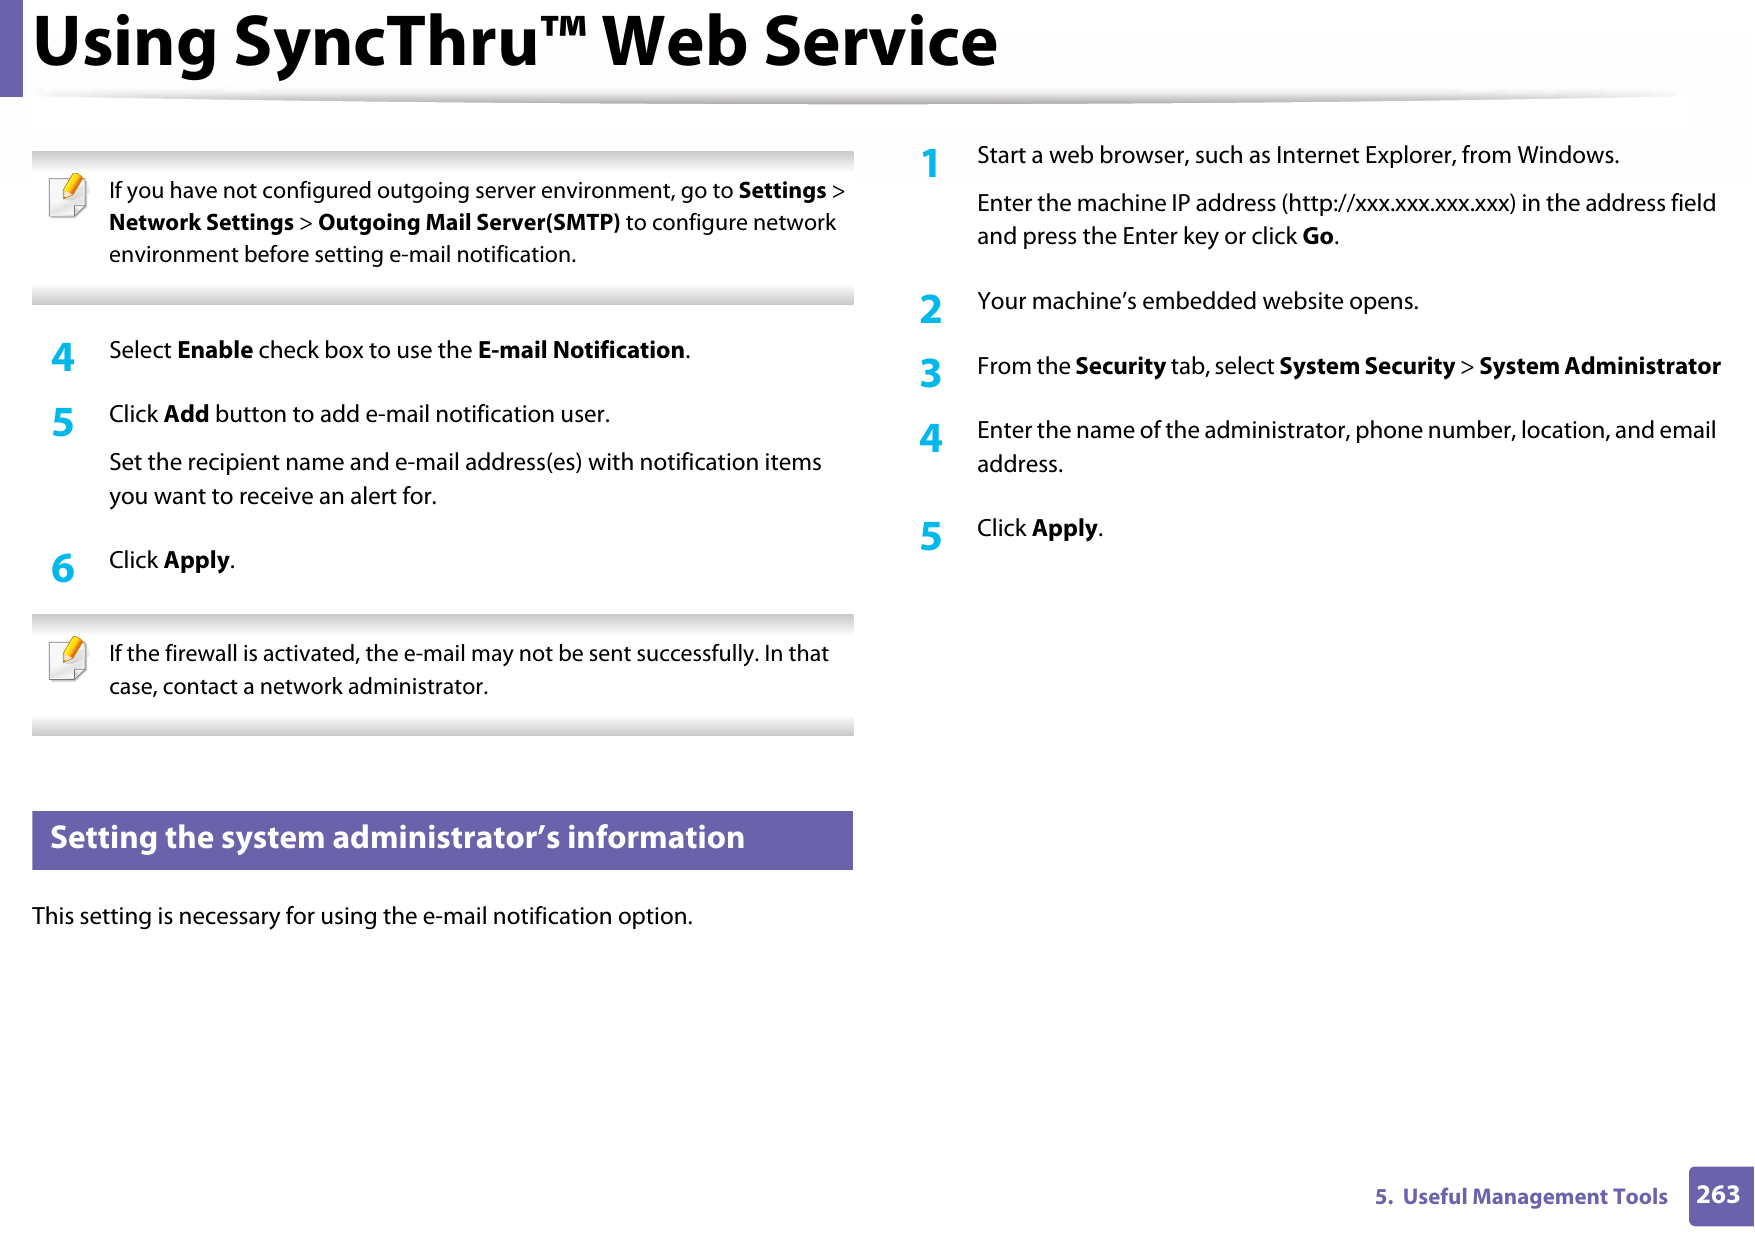 Using SyncThru™ Web Service2635.  Useful Management Tools If you have not configured outgoing server environment, go to Settings &gt; Network Settings &gt; Outgoing Mail Server(SMTP) to configure network environment before setting e-mail notification.  4  Select Enable check box to use the E-mail Notification.5  Click Add button to add e-mail notification user. Set the recipient name and e-mail address(es) with notification items you want to receive an alert for.6  Click Apply. If the firewall is activated, the e-mail may not be sent successfully. In that case, contact a network administrator. 4 Setting the system administrator’s informationThis setting is necessary for using the e-mail notification option.1Start a web browser, such as Internet Explorer, from Windows.Enter the machine IP address (http://xxx.xxx.xxx.xxx) in the address field and press the Enter key or click Go.2  Your machine’s embedded website opens.3  From the Security tab, select System Security &gt; System Administrator4  Enter the name of the administrator, phone number, location, and email address. 5  Click Apply. 